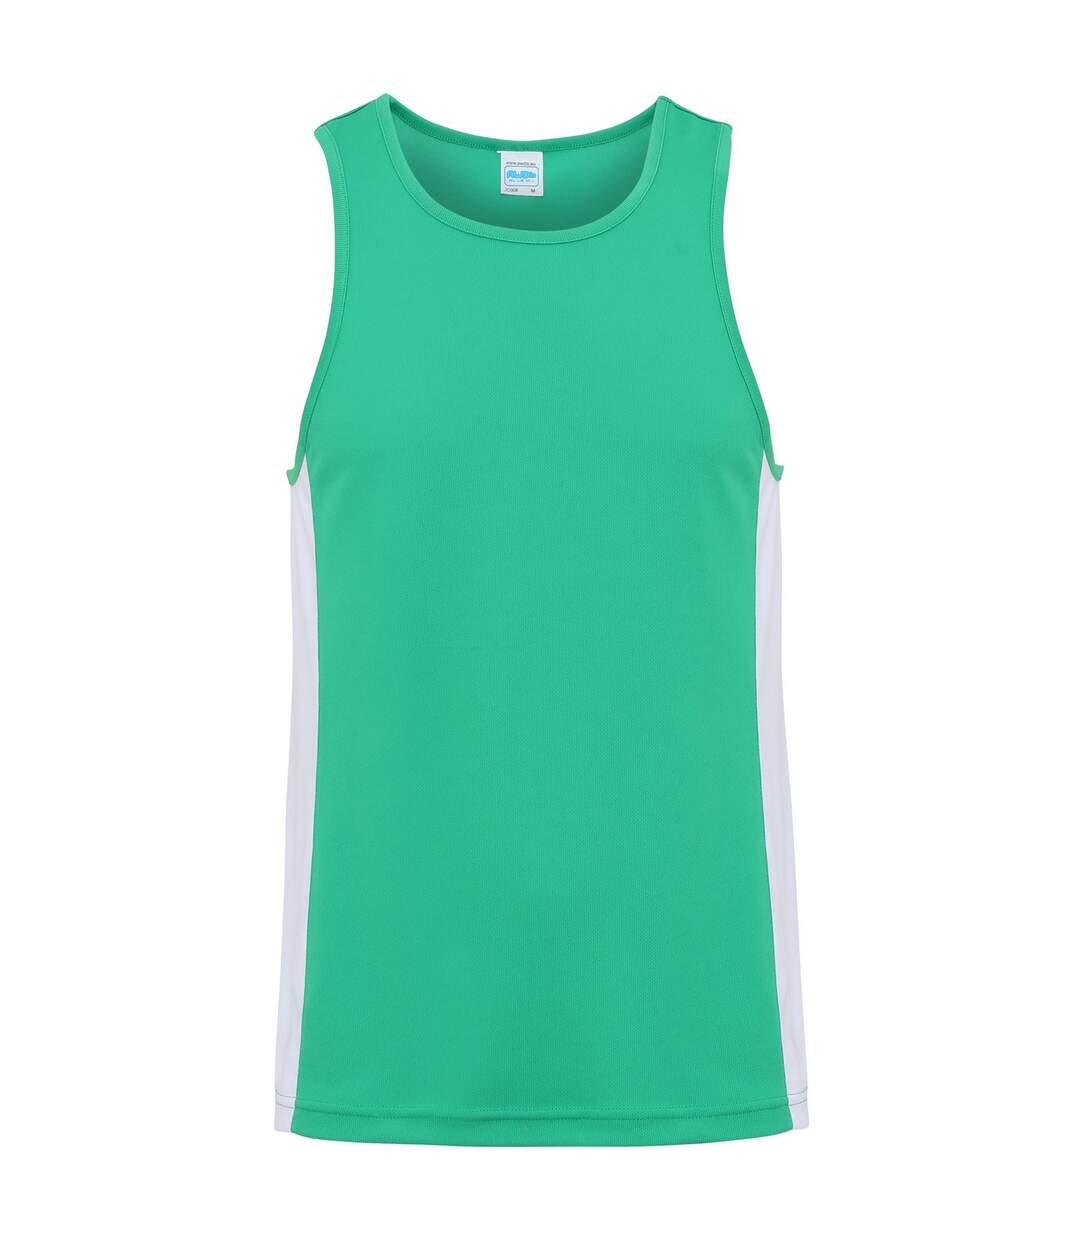 AWDis Just Cool Mens Contrast Panel Sports Vest Top (Kelly Green/Arctic White) - UTRW3476